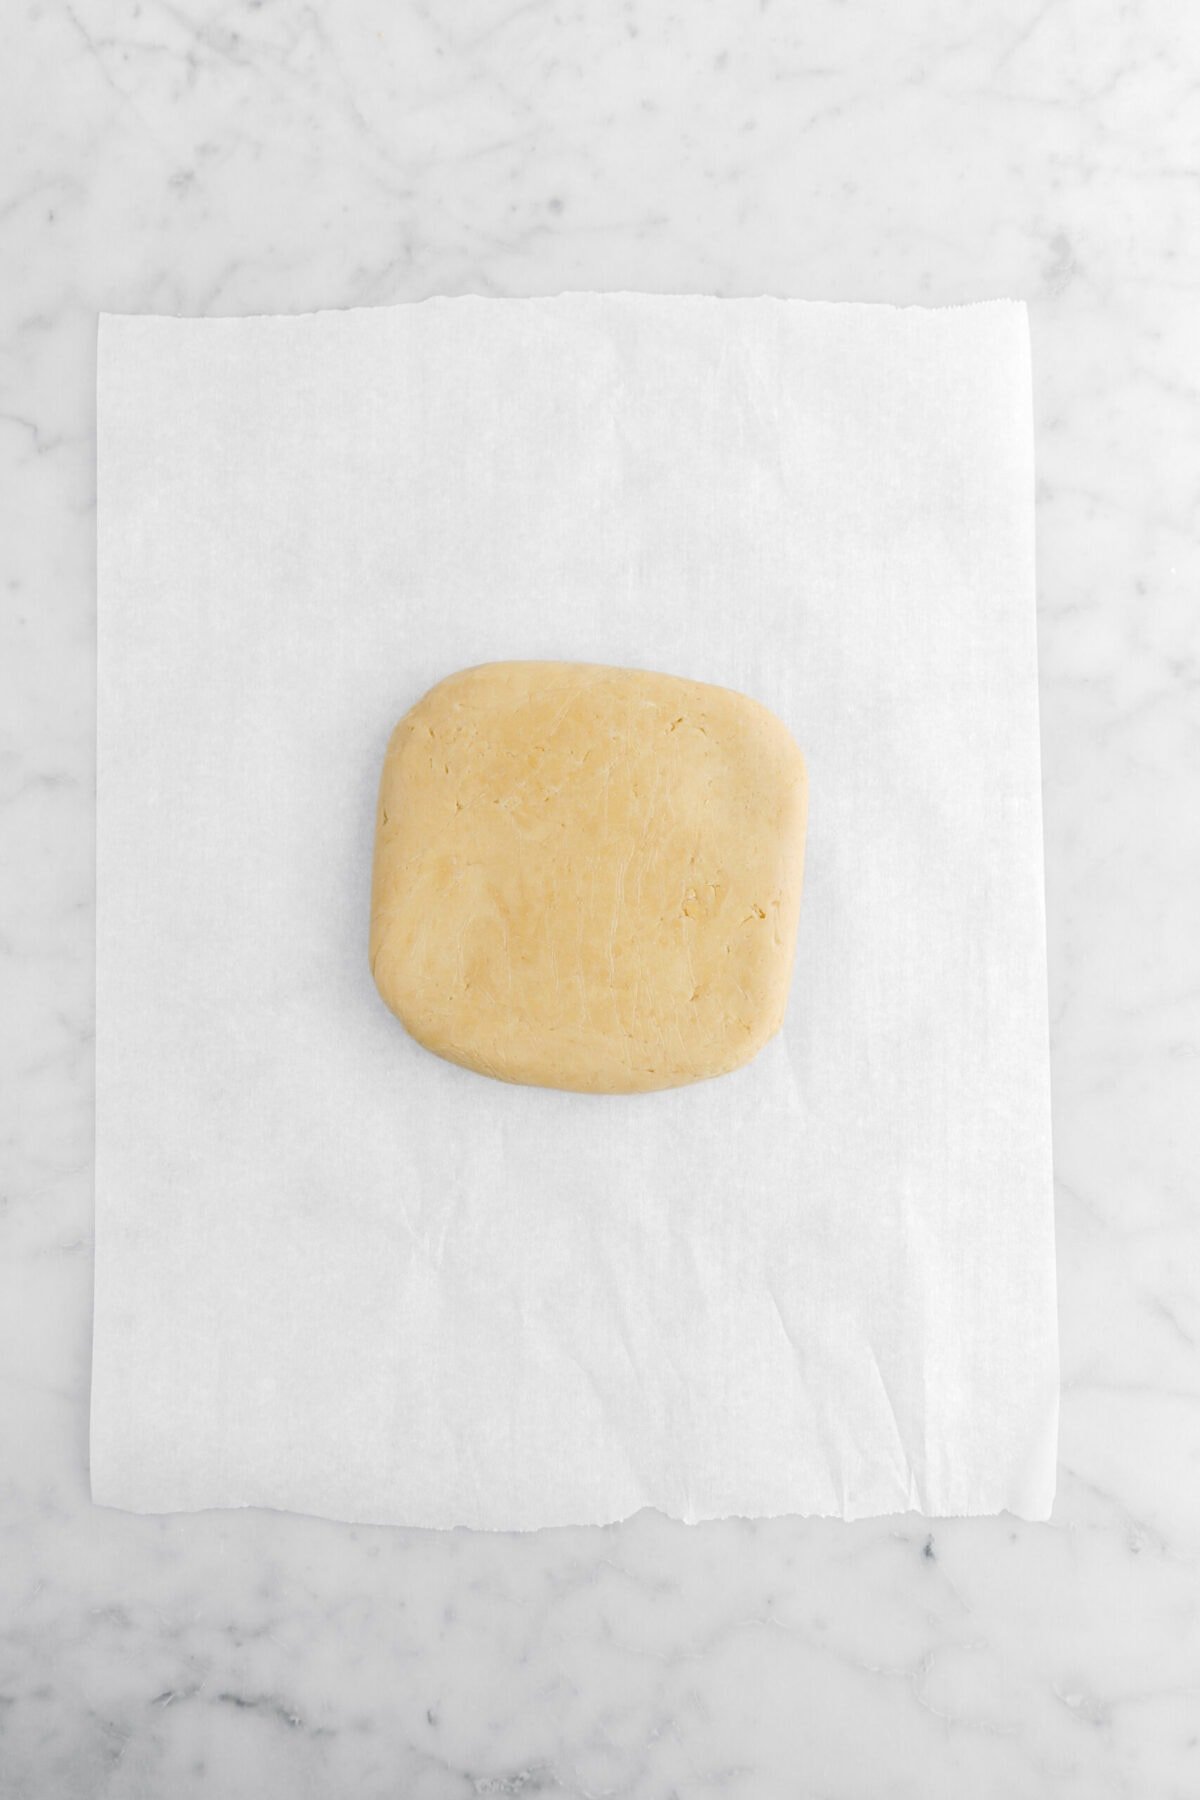 cookie dough in square shape on parchment paper.